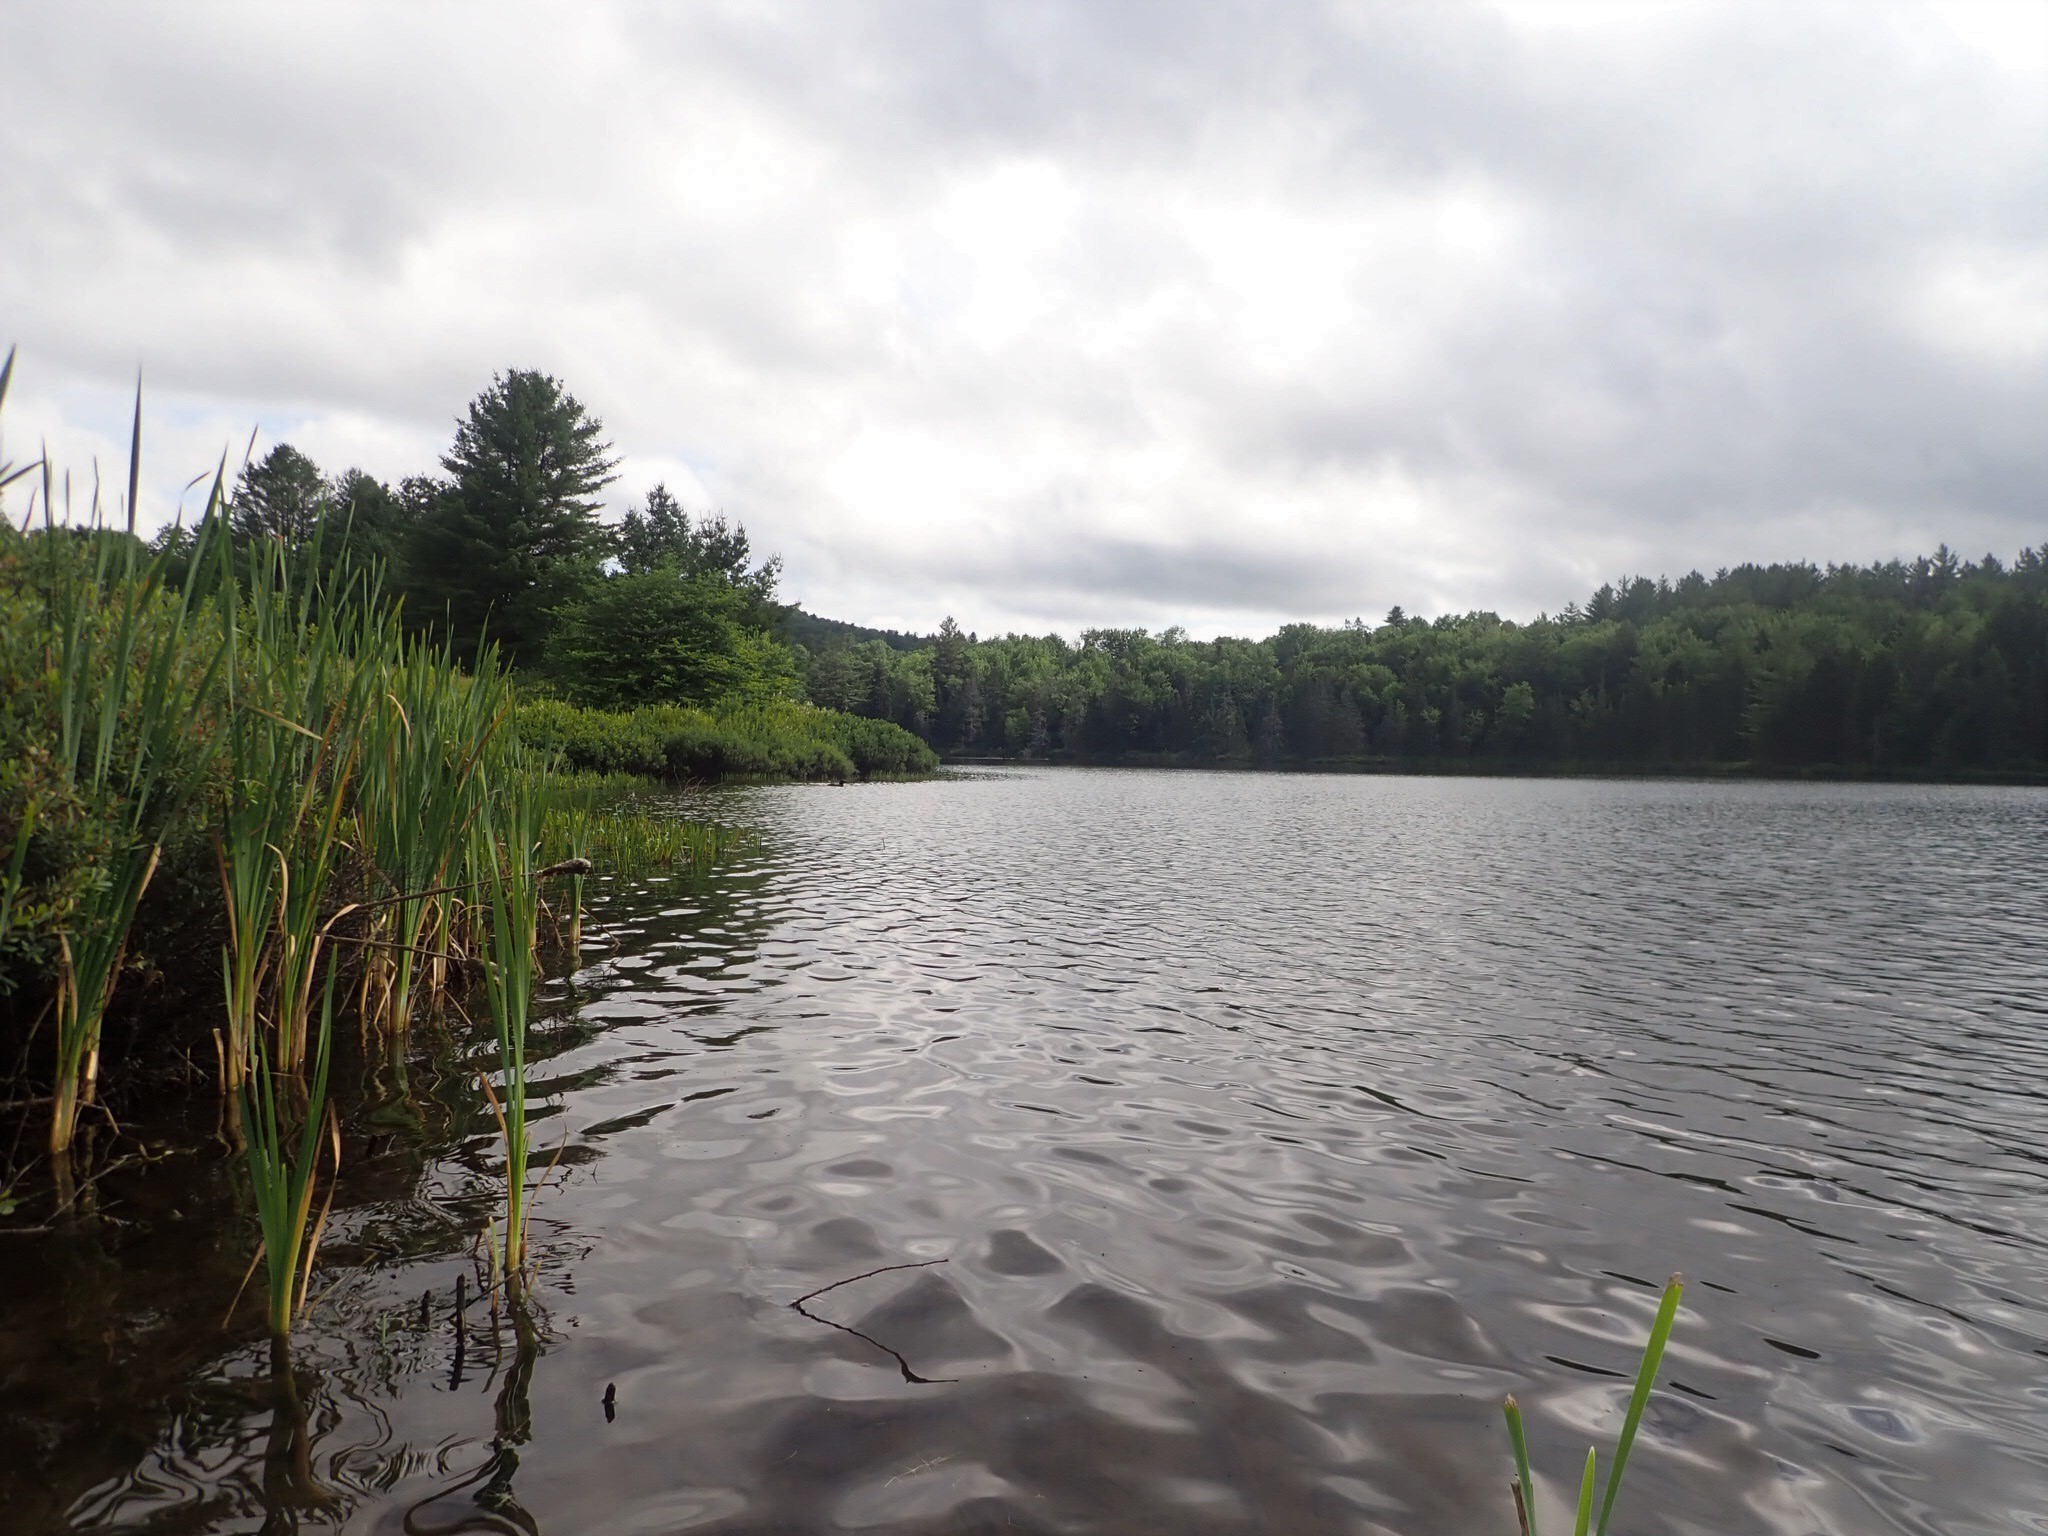 Overcast skies on Colby Pond / © Rose West